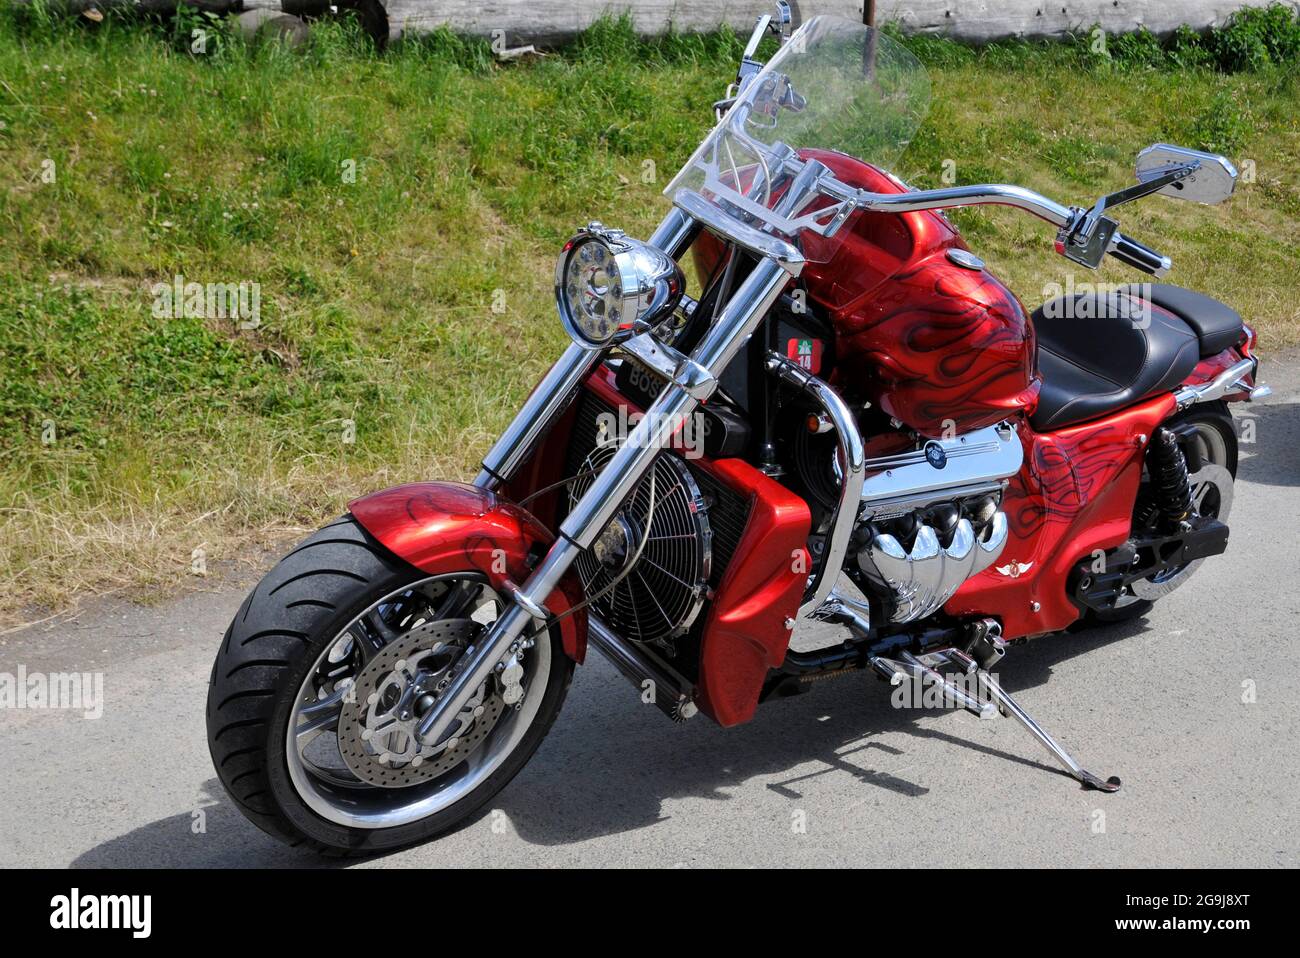 Page 2 - The Boss Hoss High Resolution Stock Photography and Images - Alamy